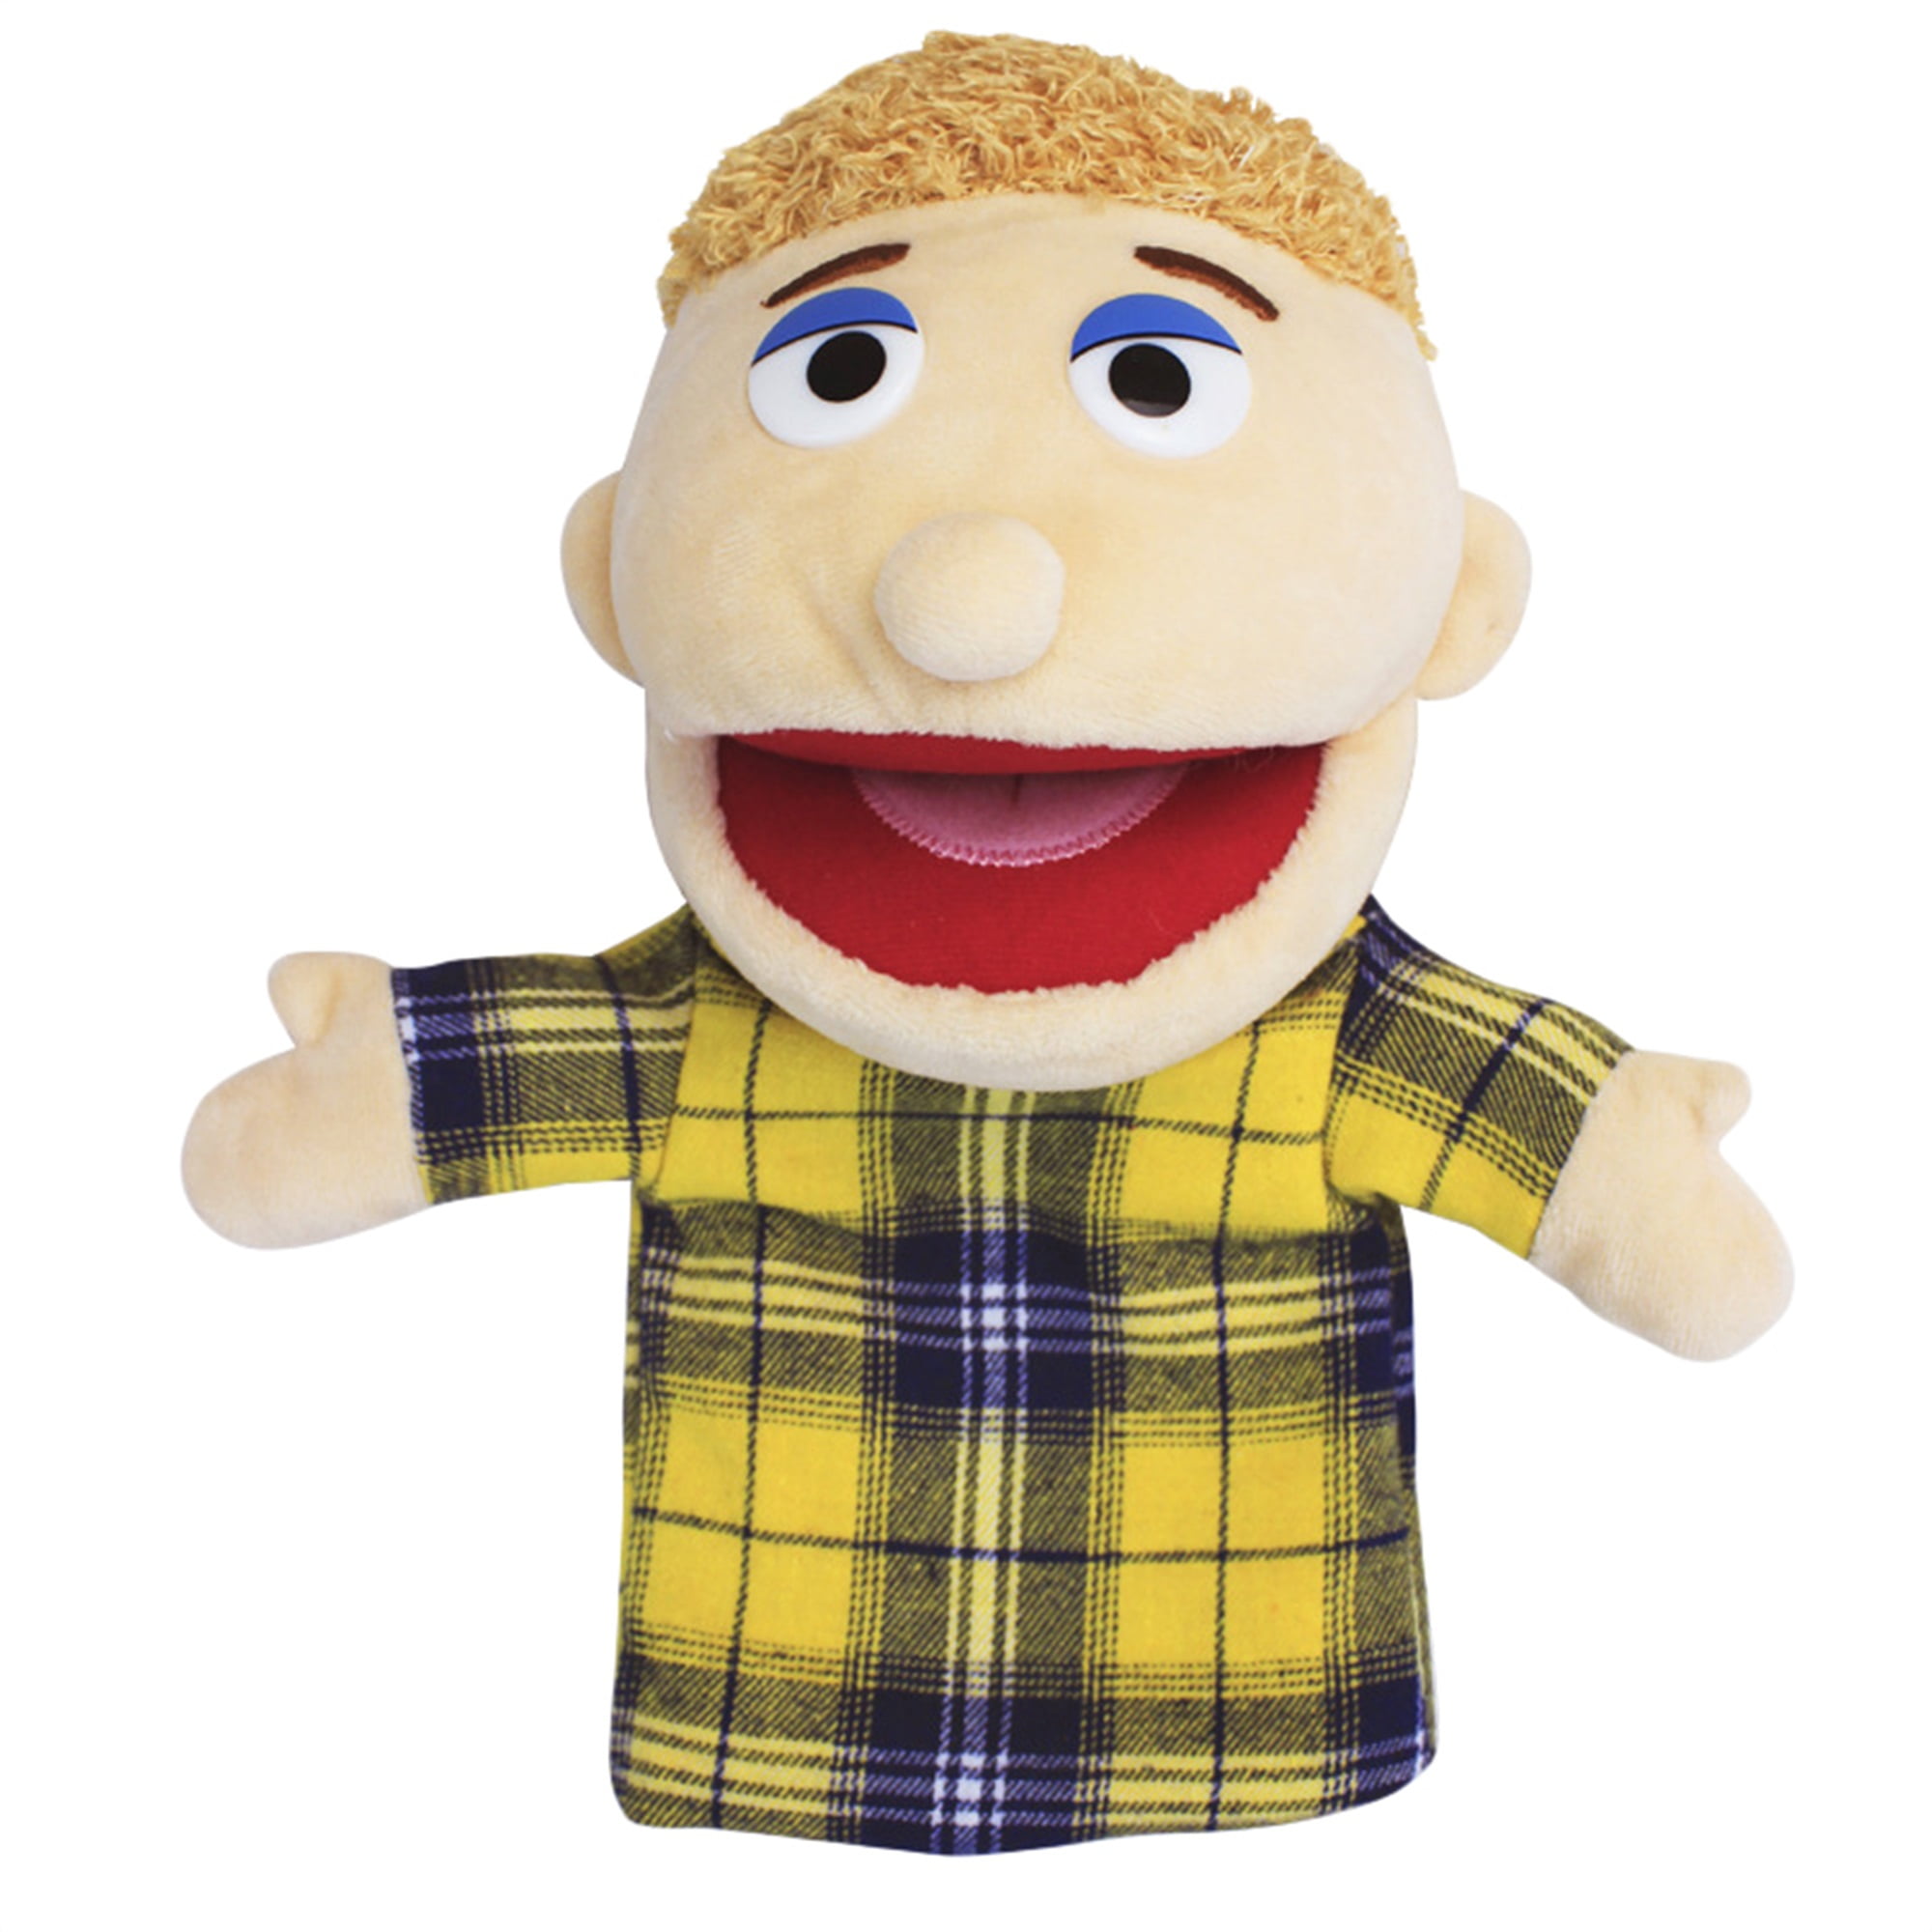 Jeffy Puppet Plush Toy Doll, Jeffy Puppets SML Toy, Mischievous Funny  Puppets Toy with Working Mouth, for Children Boys Girls Role-Playing,  Storytelling : : Toys & Games